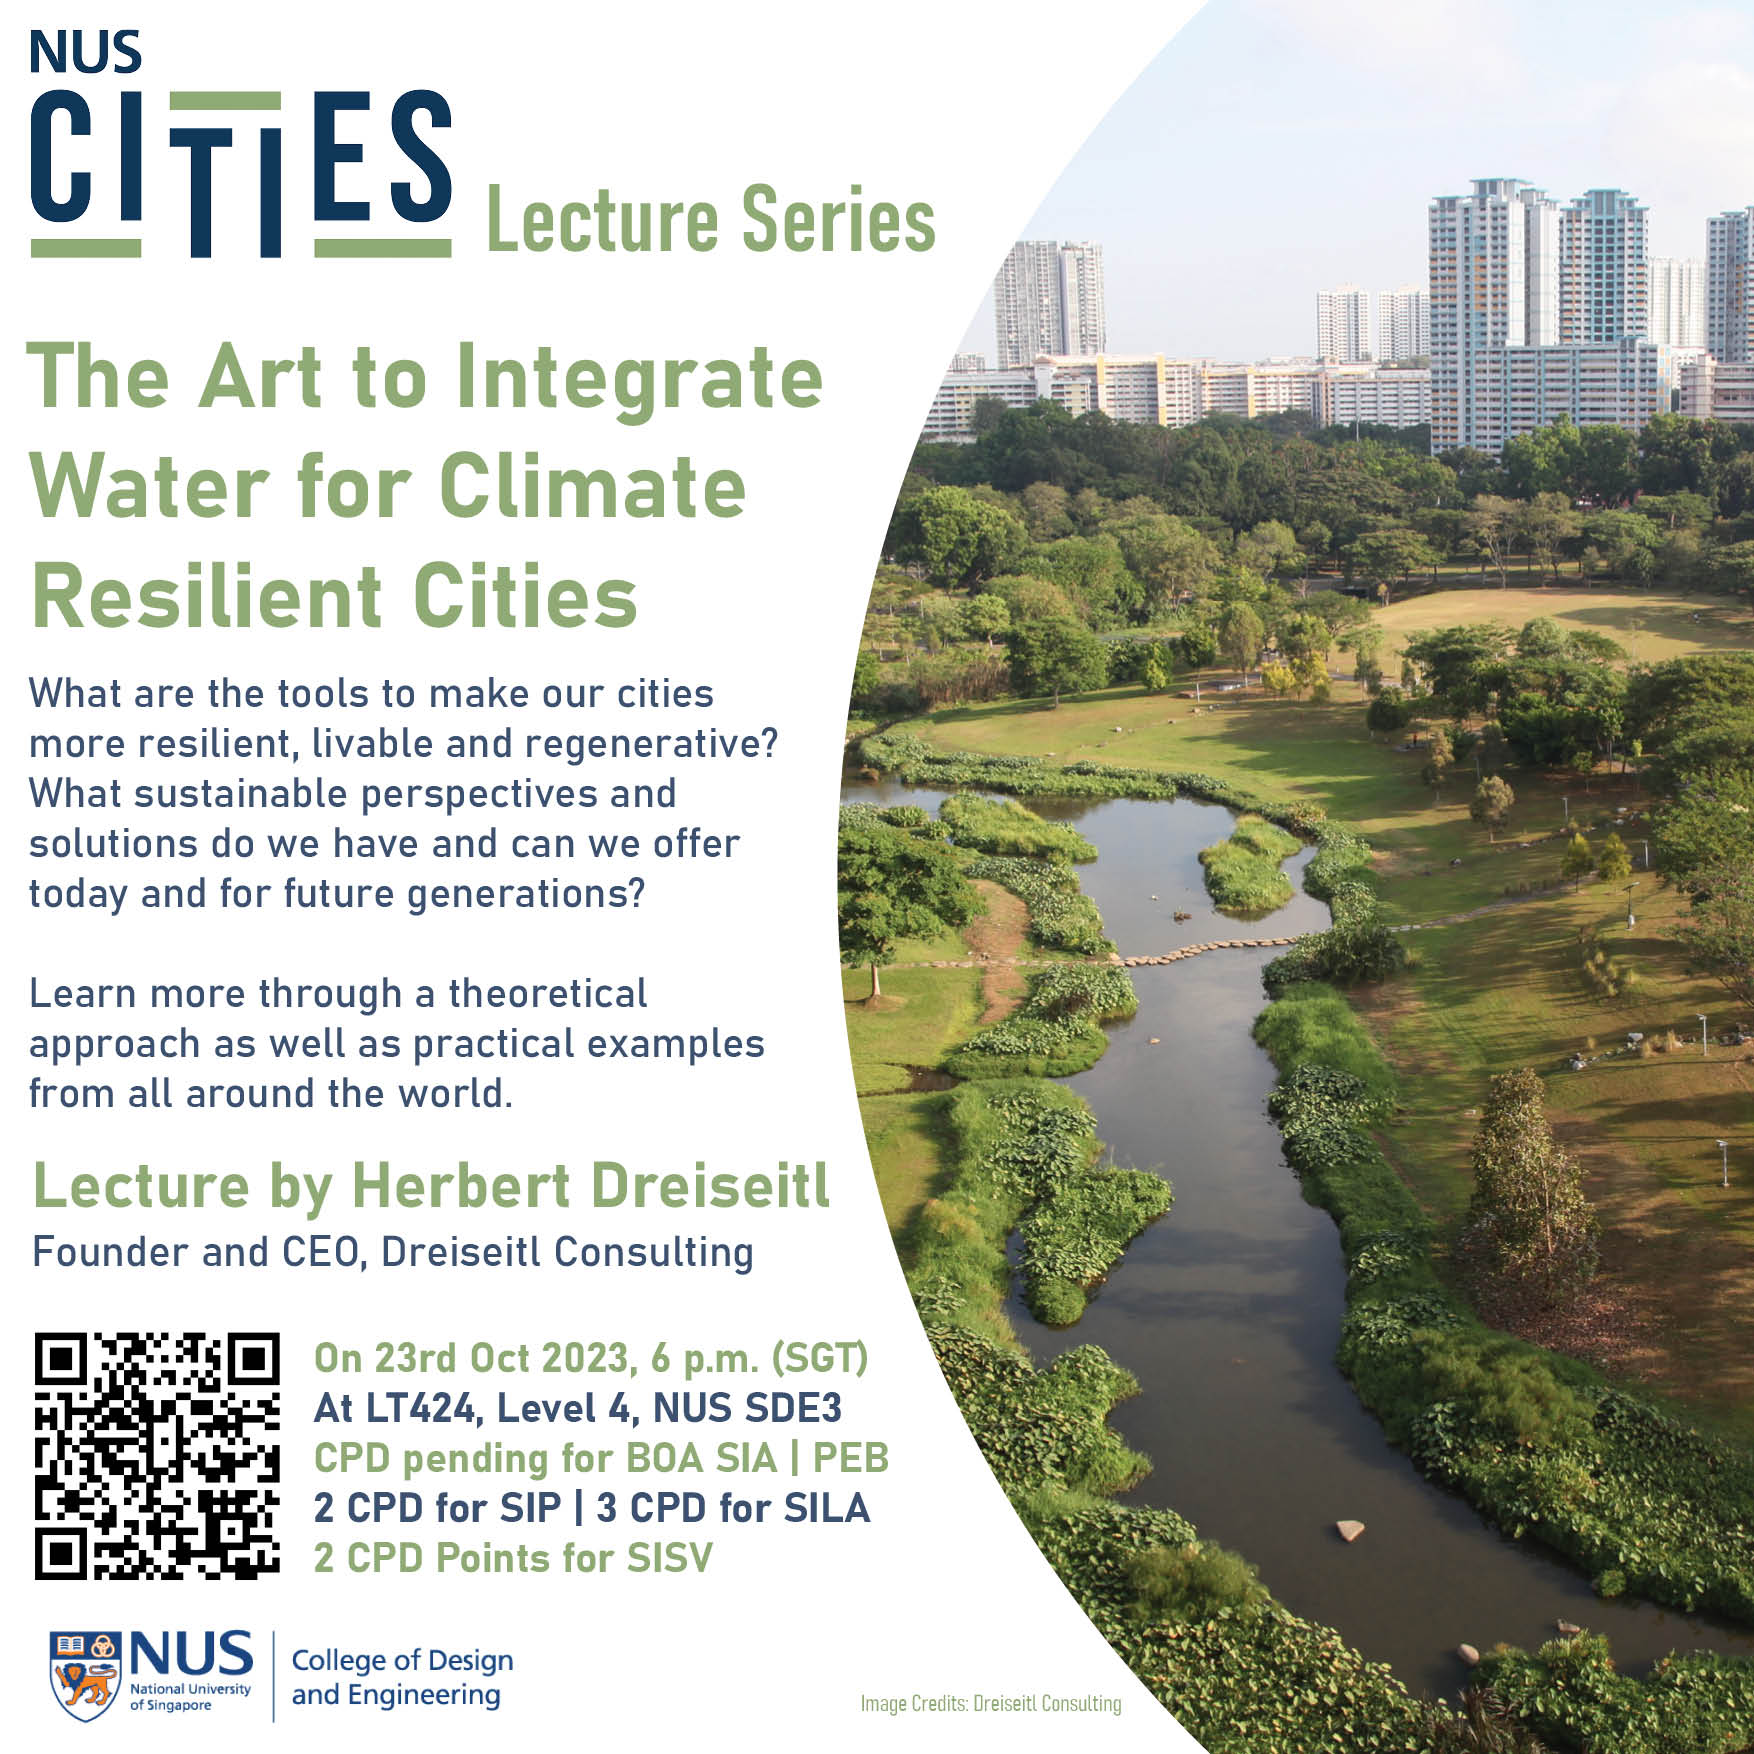 NUS Cities Lecture 6: The Art to Integrate Water for Climate Resilient Cities